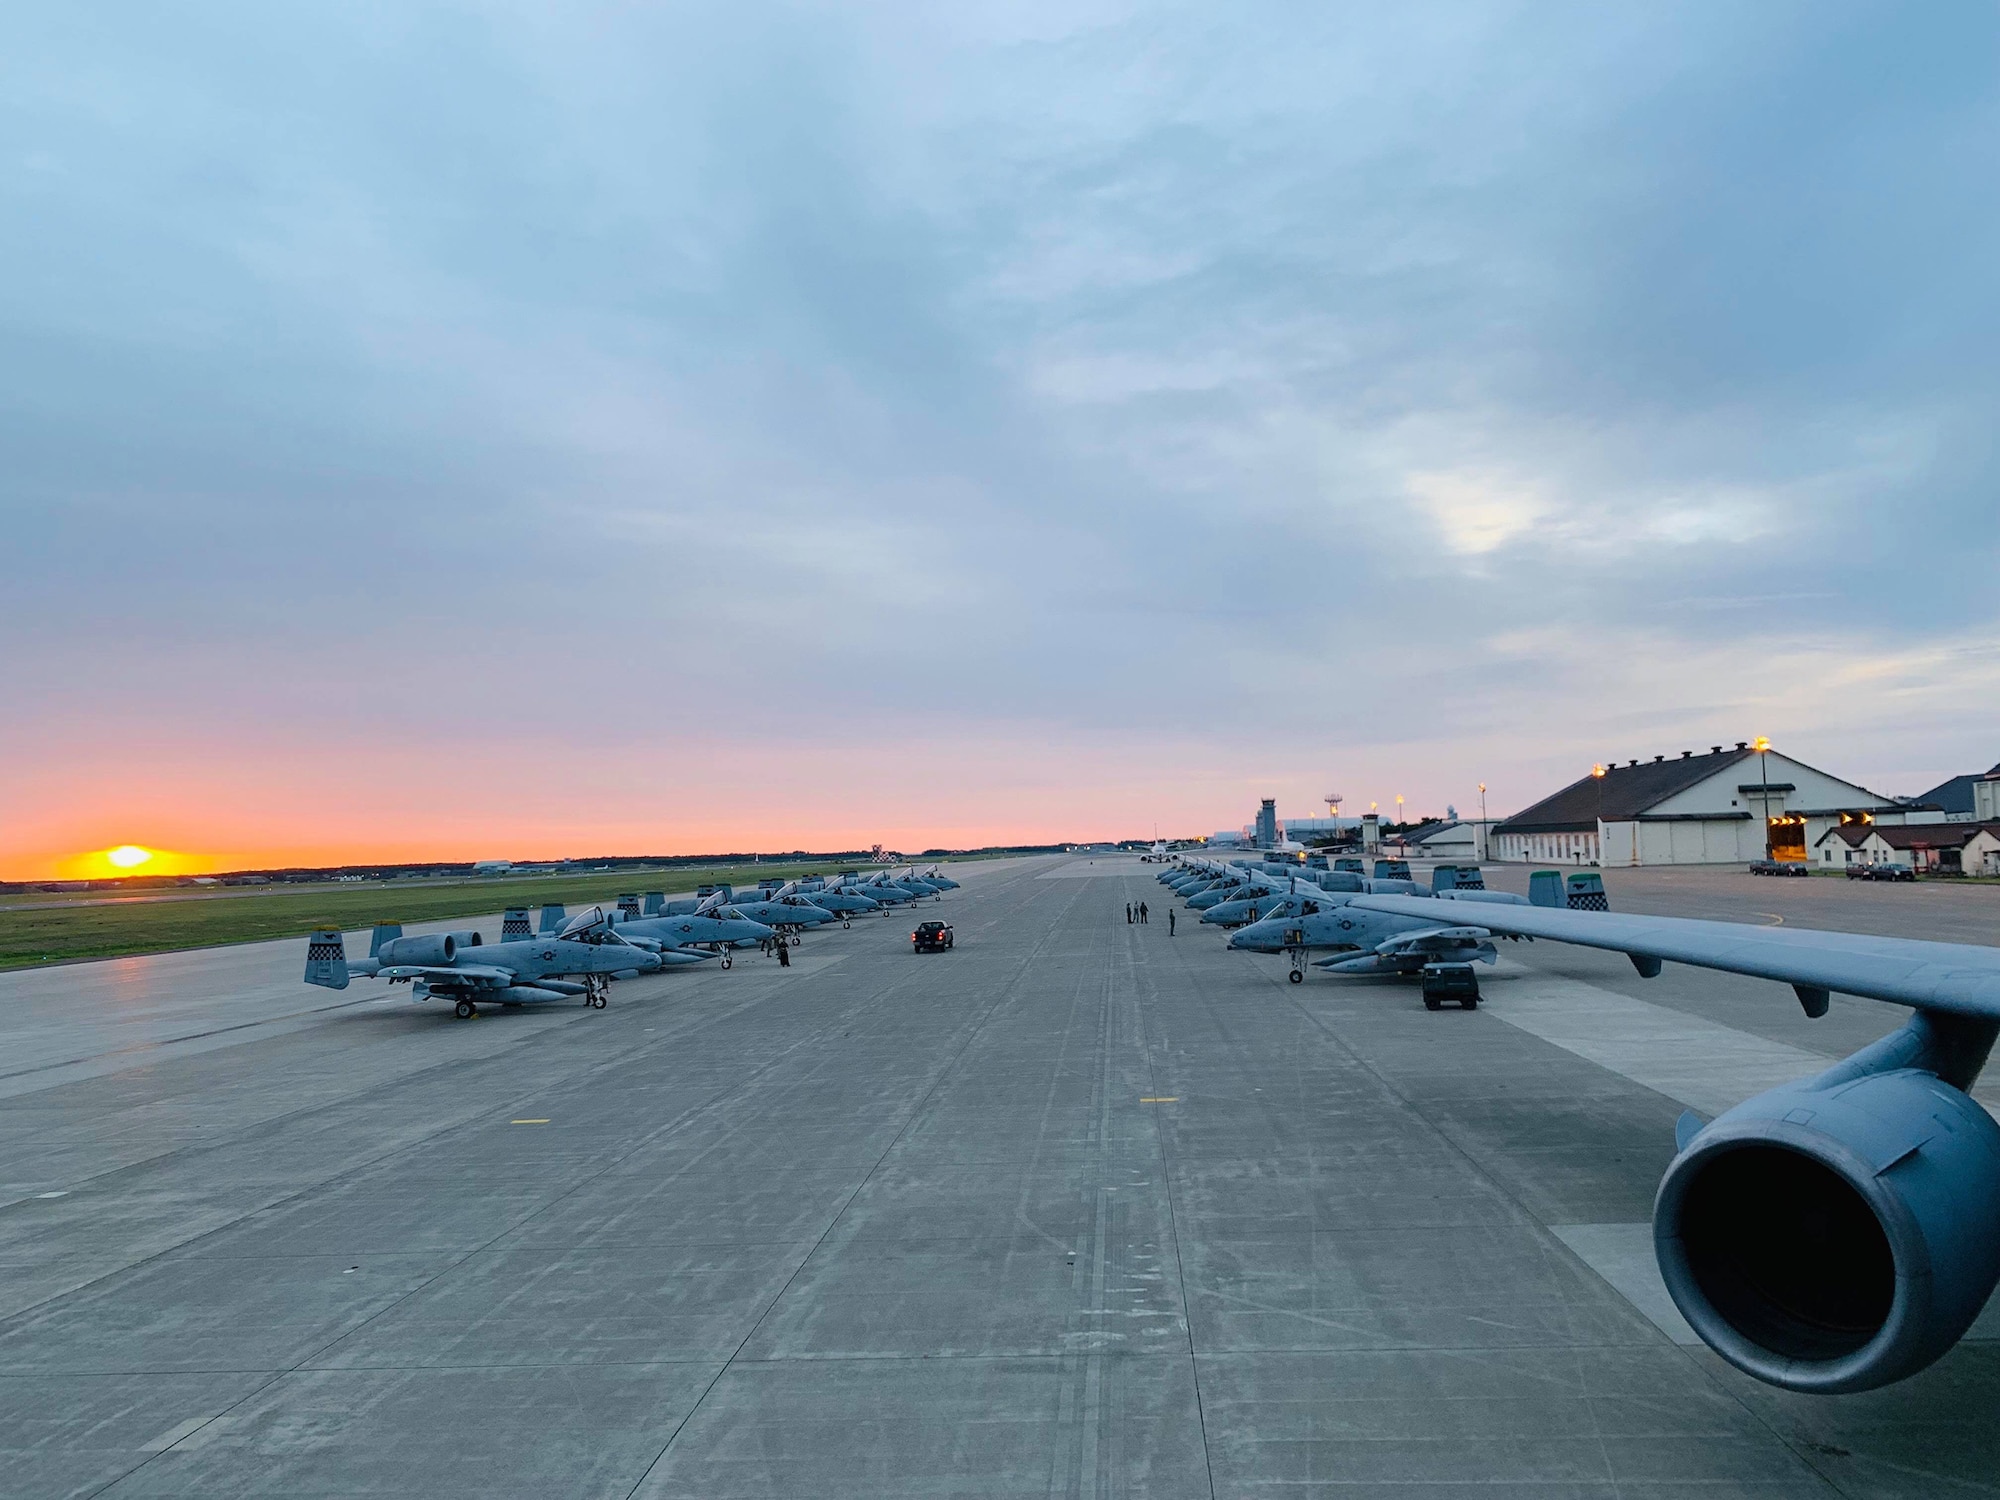 U.S. Air Force A-10 Thunderbolt aircraft line up on the tarmac prior to taking off for Red Flag Alaska 19-2. RF-A is a large-scale exercise headquartered at Eielson Air Force Base, Alaska. The exercise began June 6 and is scheduled to continue through June 21. (U.S. Air Force courtesy photo)